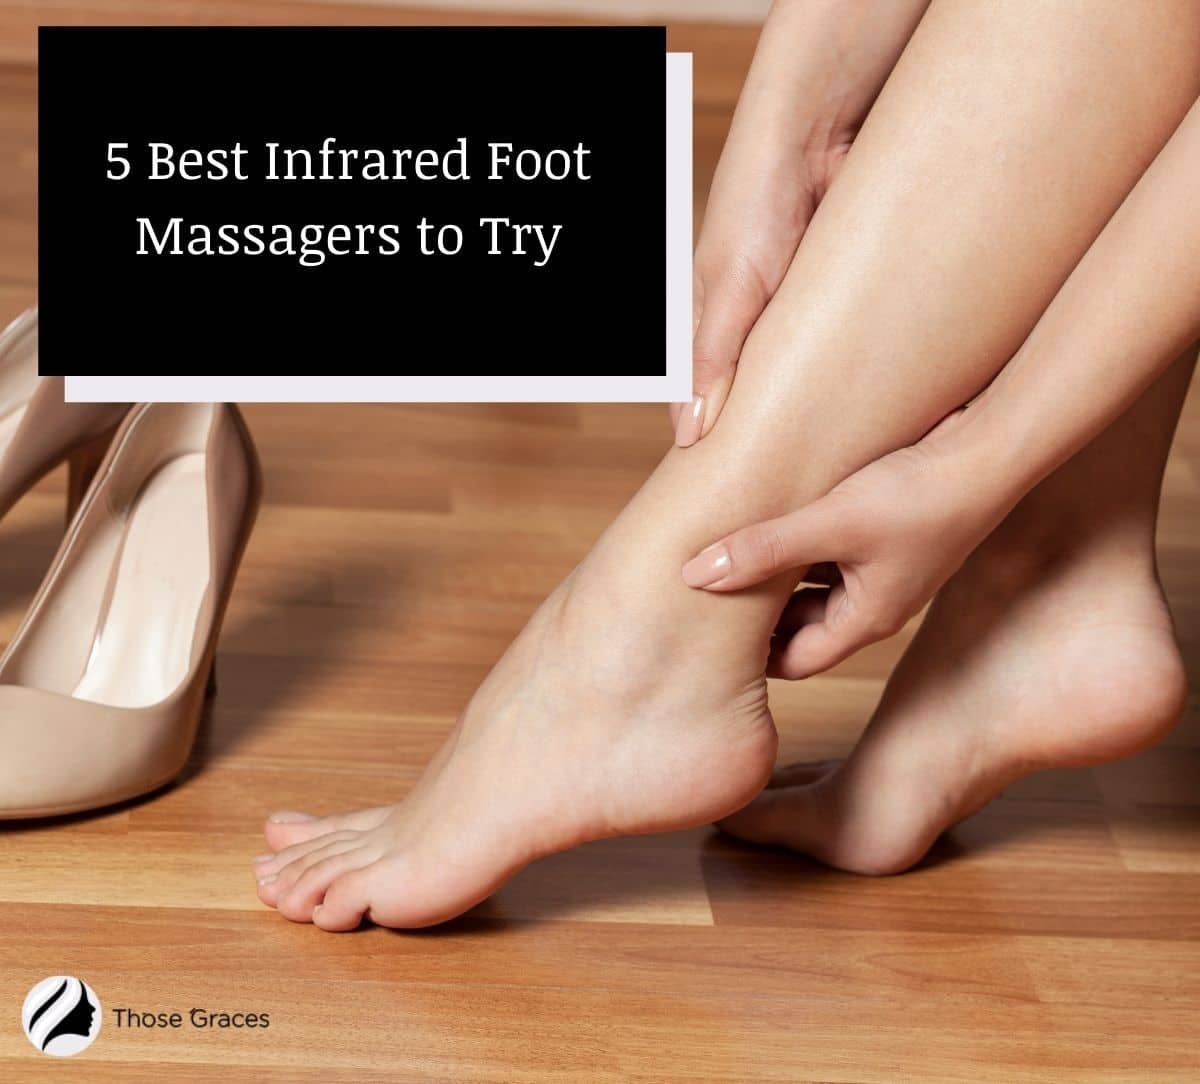 a lady massaging her aching feet and will use infrared foot massagers